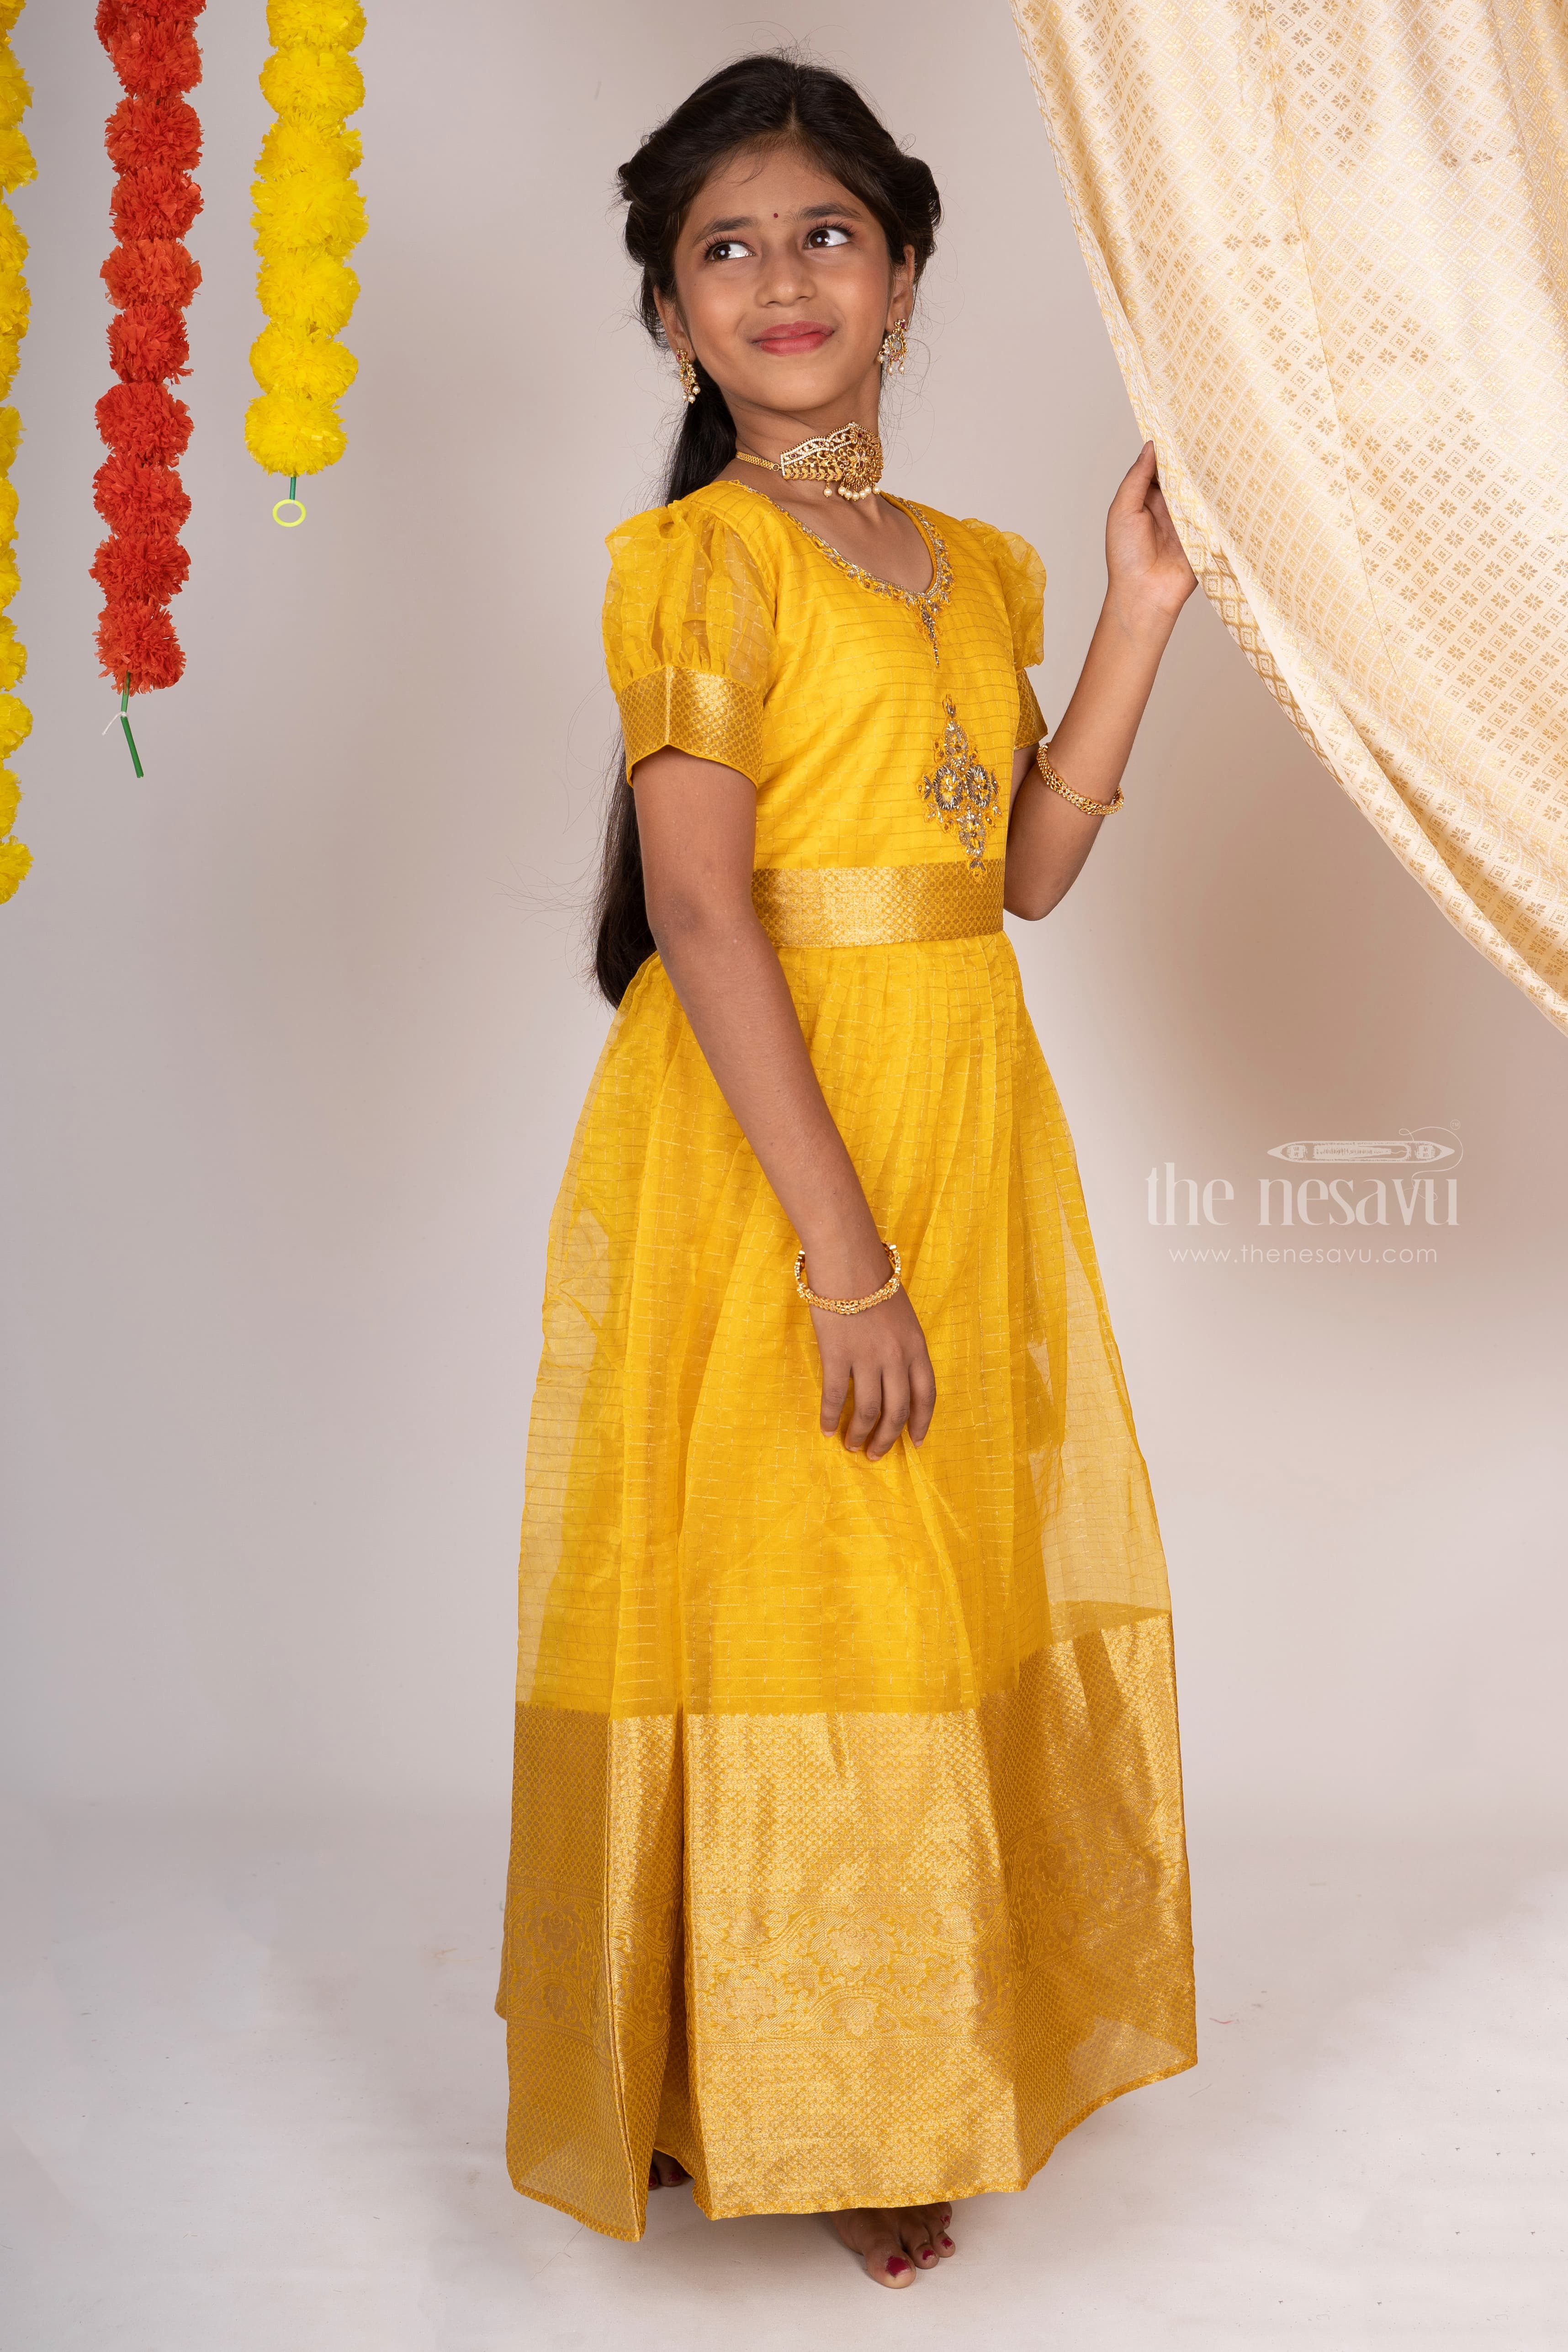 Golden Colour Party Wear Gown  Golden Party Wear Gown Design Images Party  Wear Gown Design Ideas  YouTube